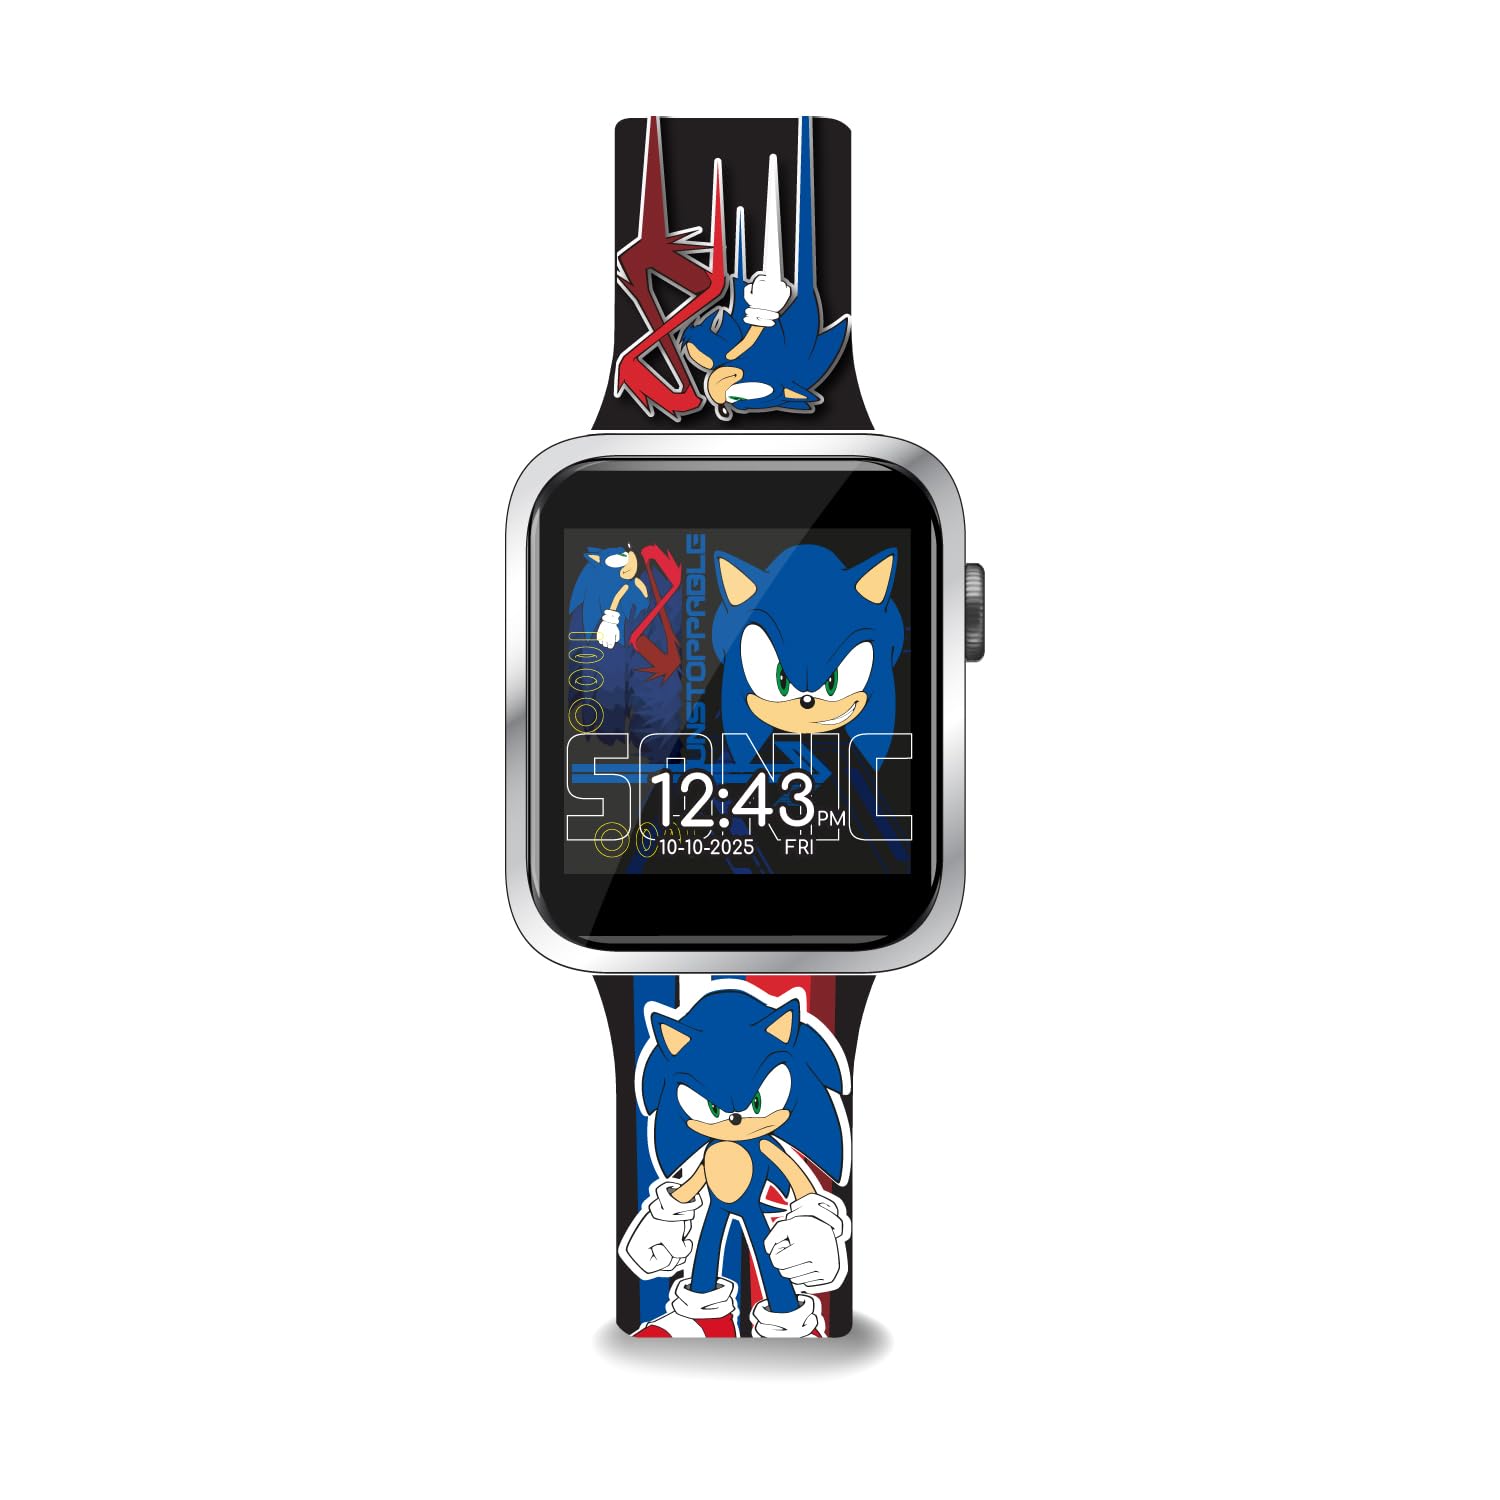 Accutime SEGA Sonic The Hedgehog Black Adult Smartwatch for Men, Women, Unisex - Touchscreen Camera, Weather, Messaging, Sports, Music, Heart Rate Monitor, Pedometer & More (Model: SNC4352M)